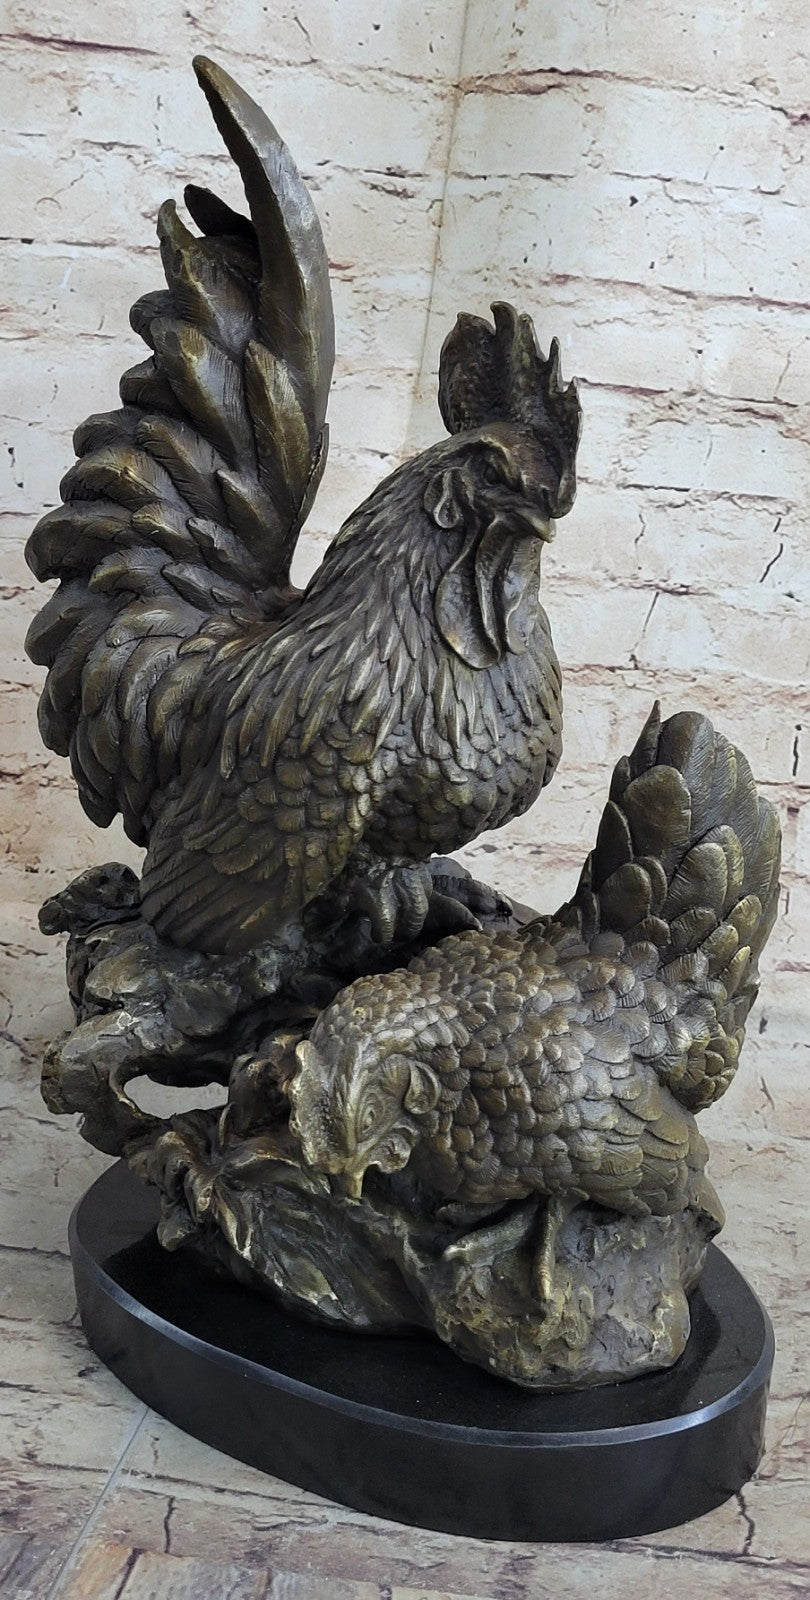 Bronze Sculpture Hot Cast Handcrafted Rooster Museums Quality Classic Work